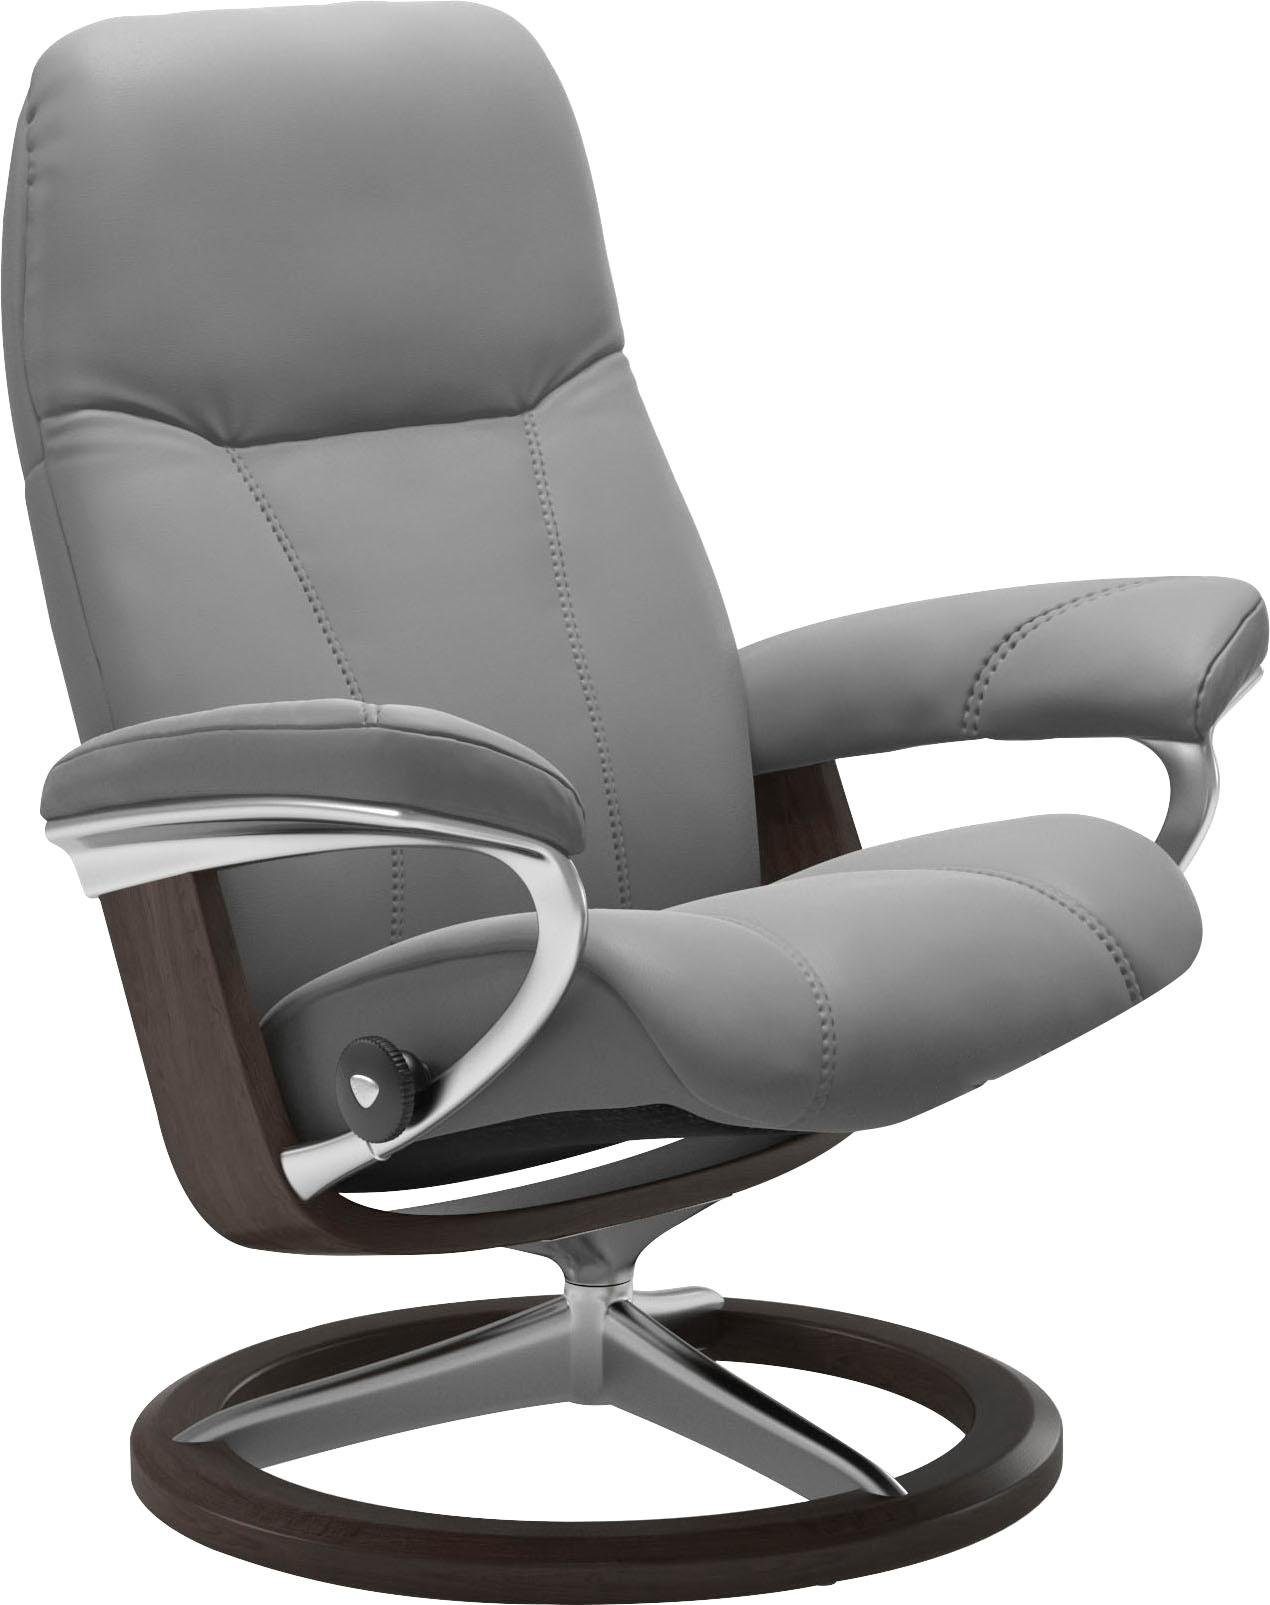 Stressless® Relaxsessel Consul, mit Signature Base, Größe M, Gestell Wenge | Funktionssessel